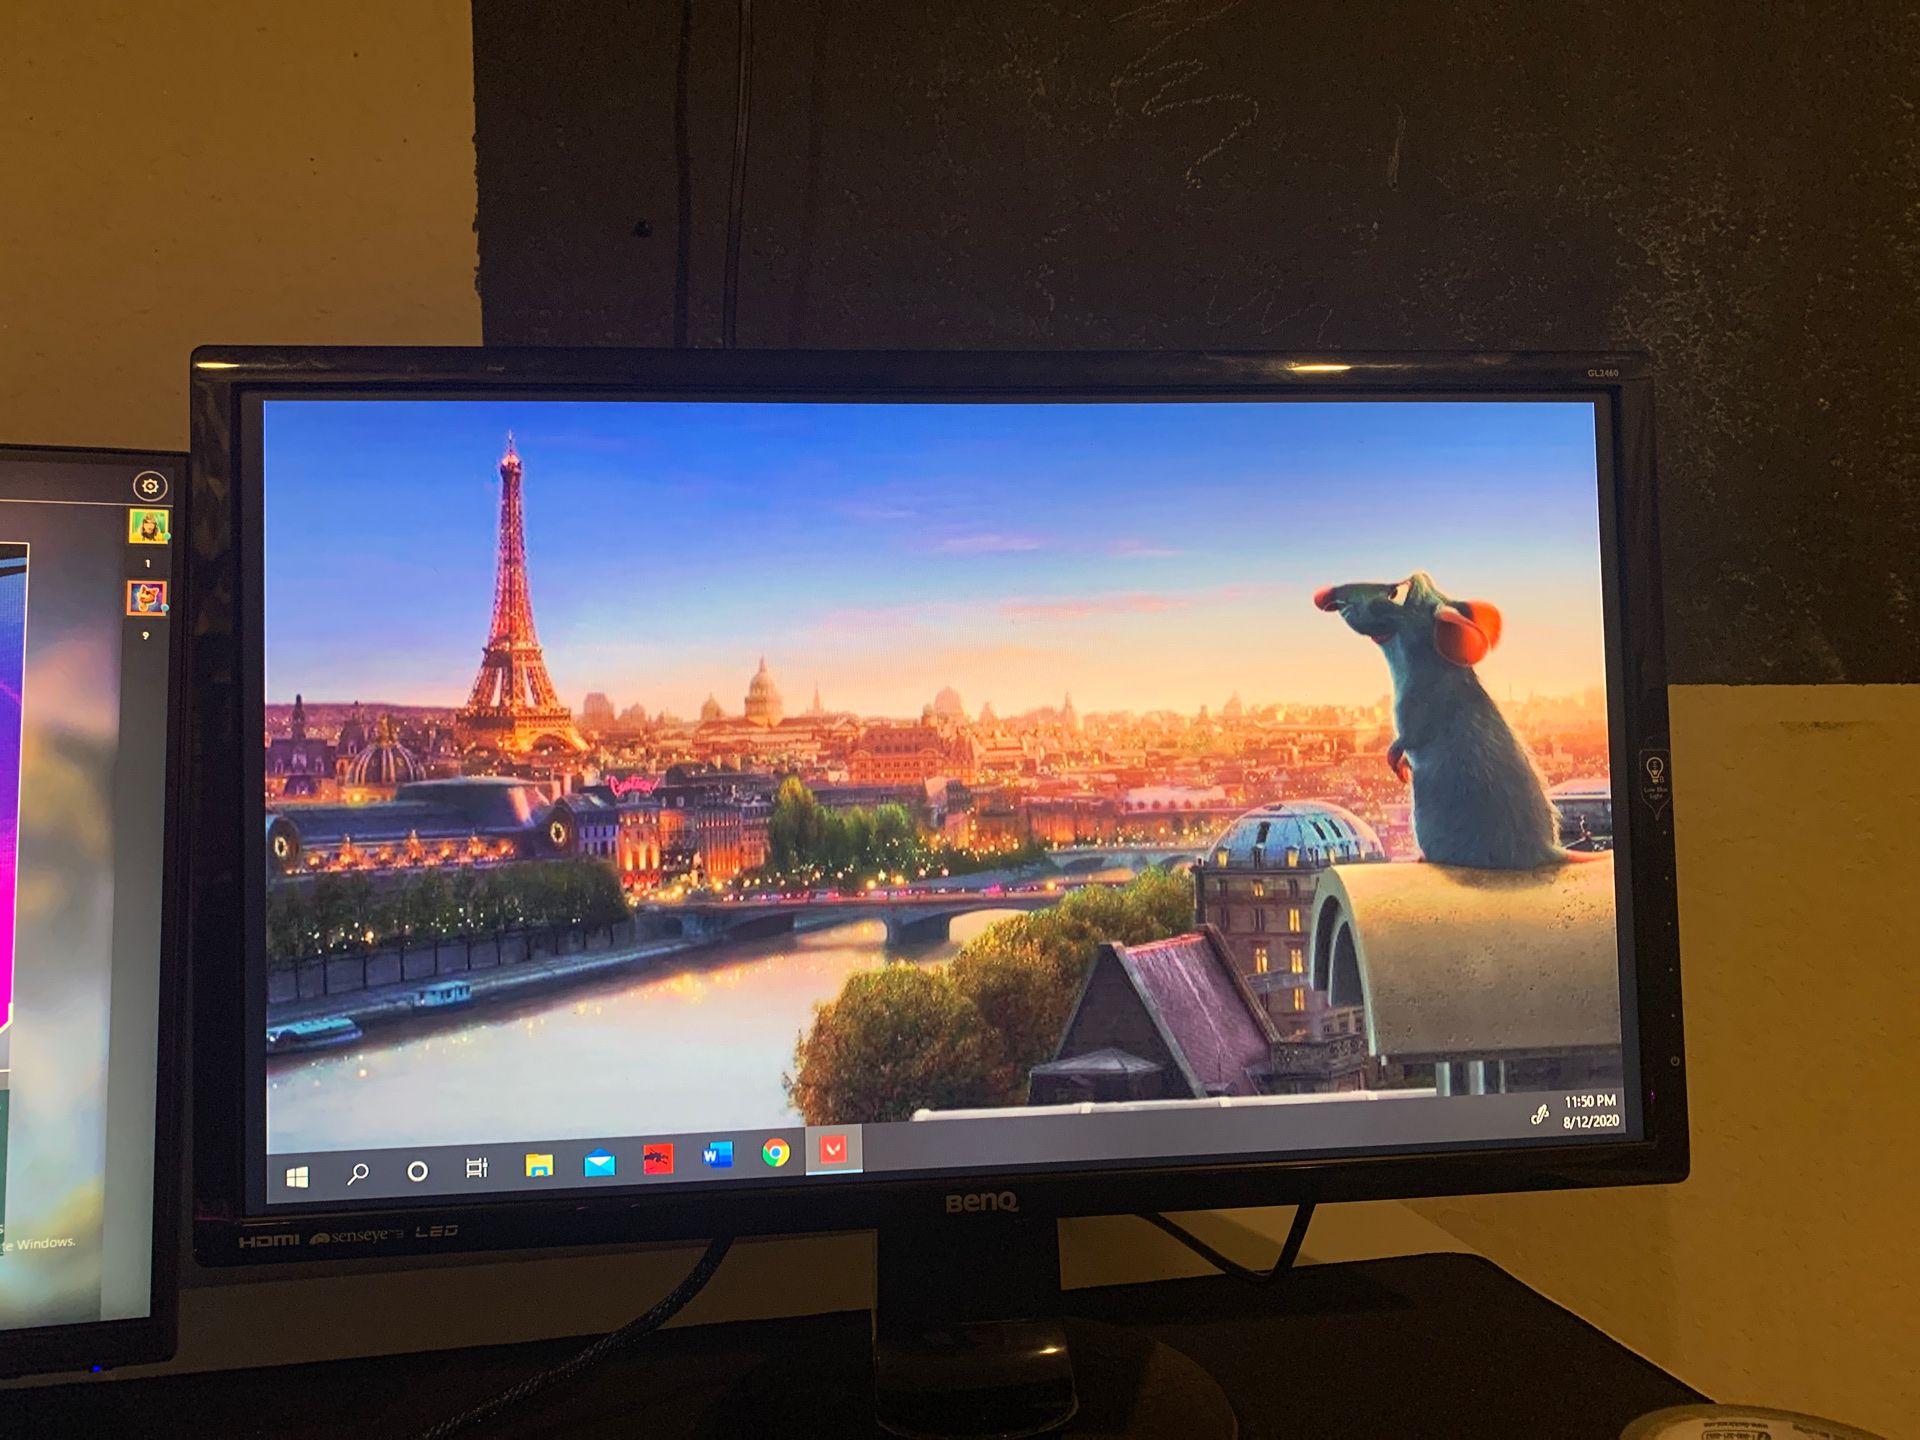 Bend gaming monitor 24inch